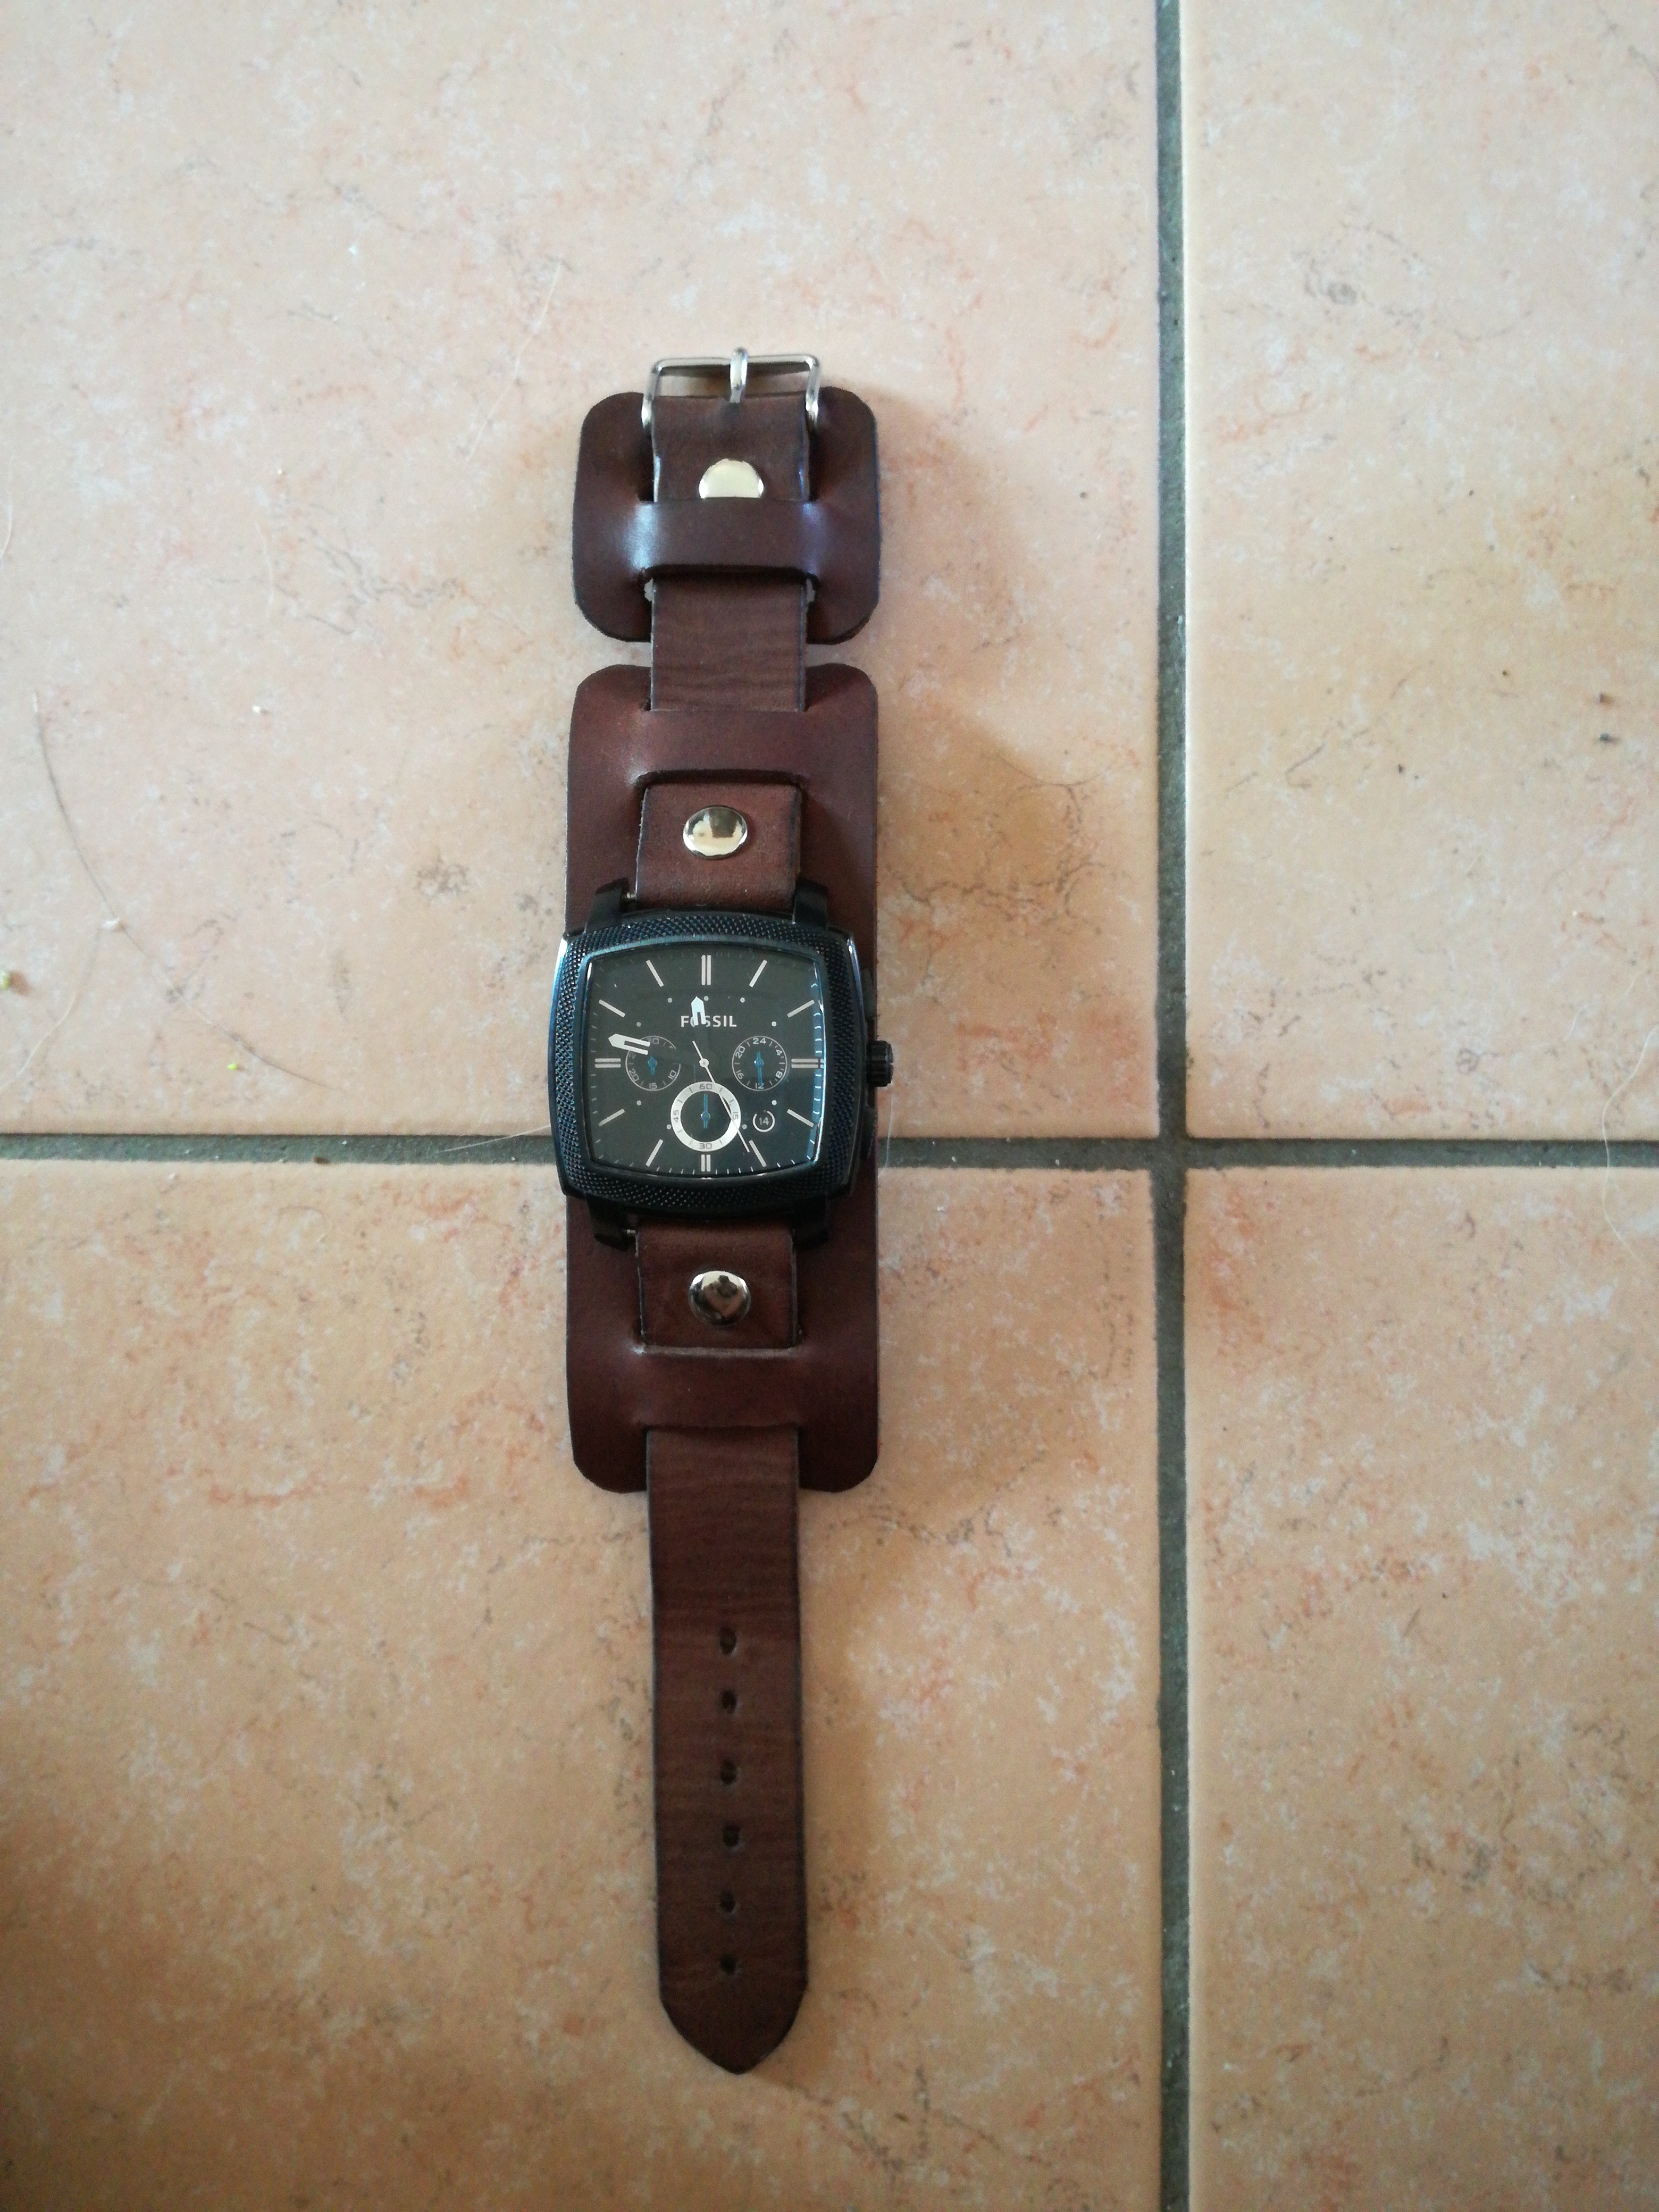 Predestination movie Time Traveller's Wrist Watch (all hints and clues  welcome) | RPF Costume and Prop Maker Community